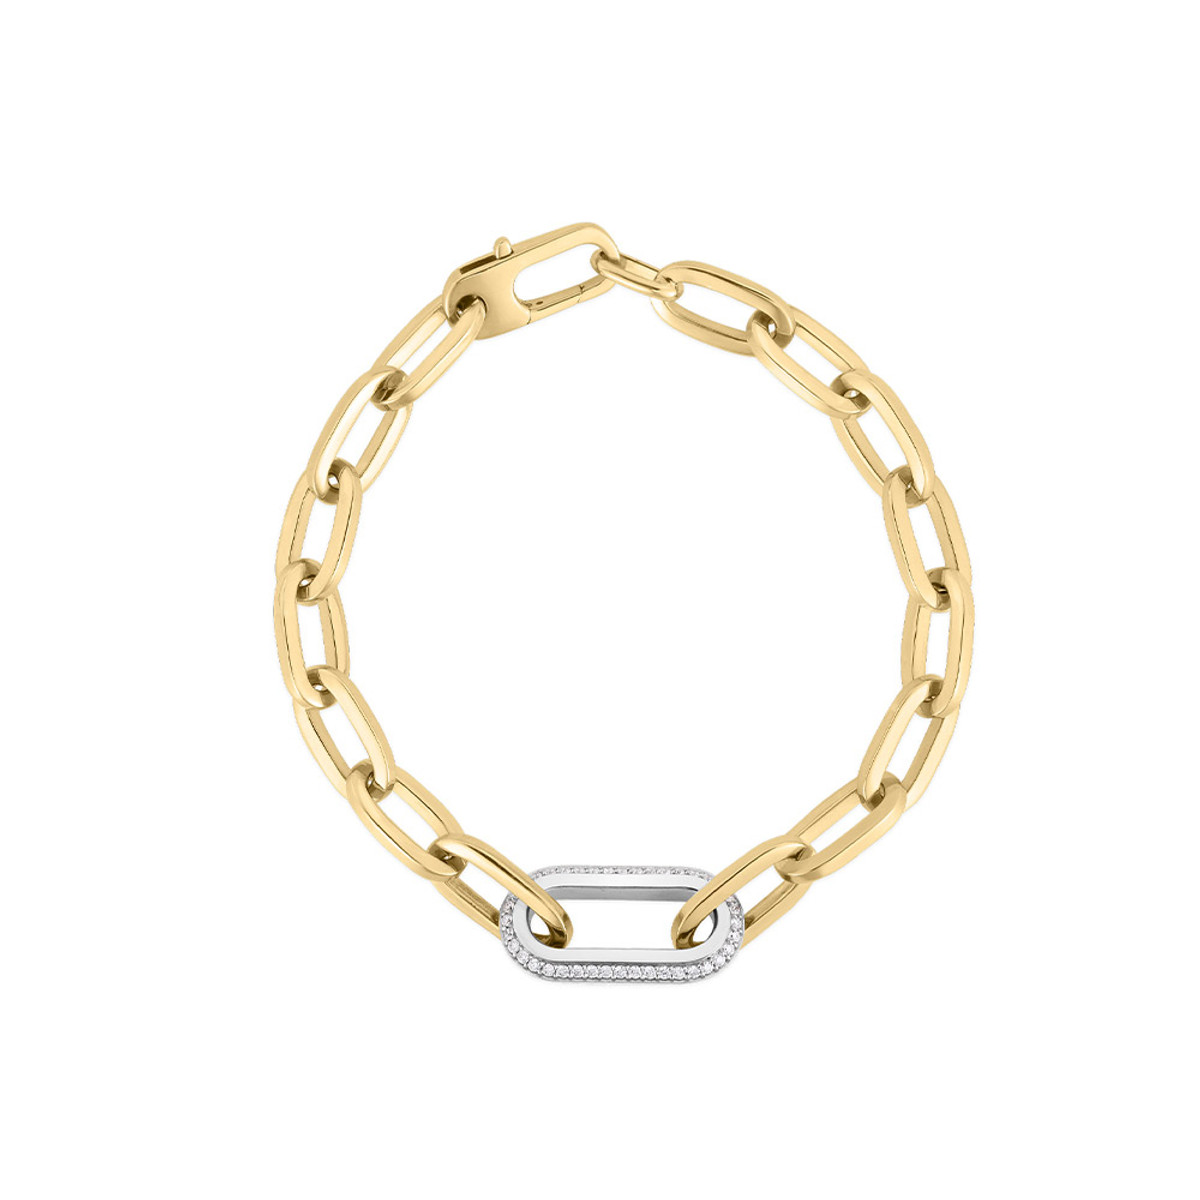 Roberto Coin 18K Yellow and White Gold Designer Gold Diamond Link Bracelet-57406 Product Image